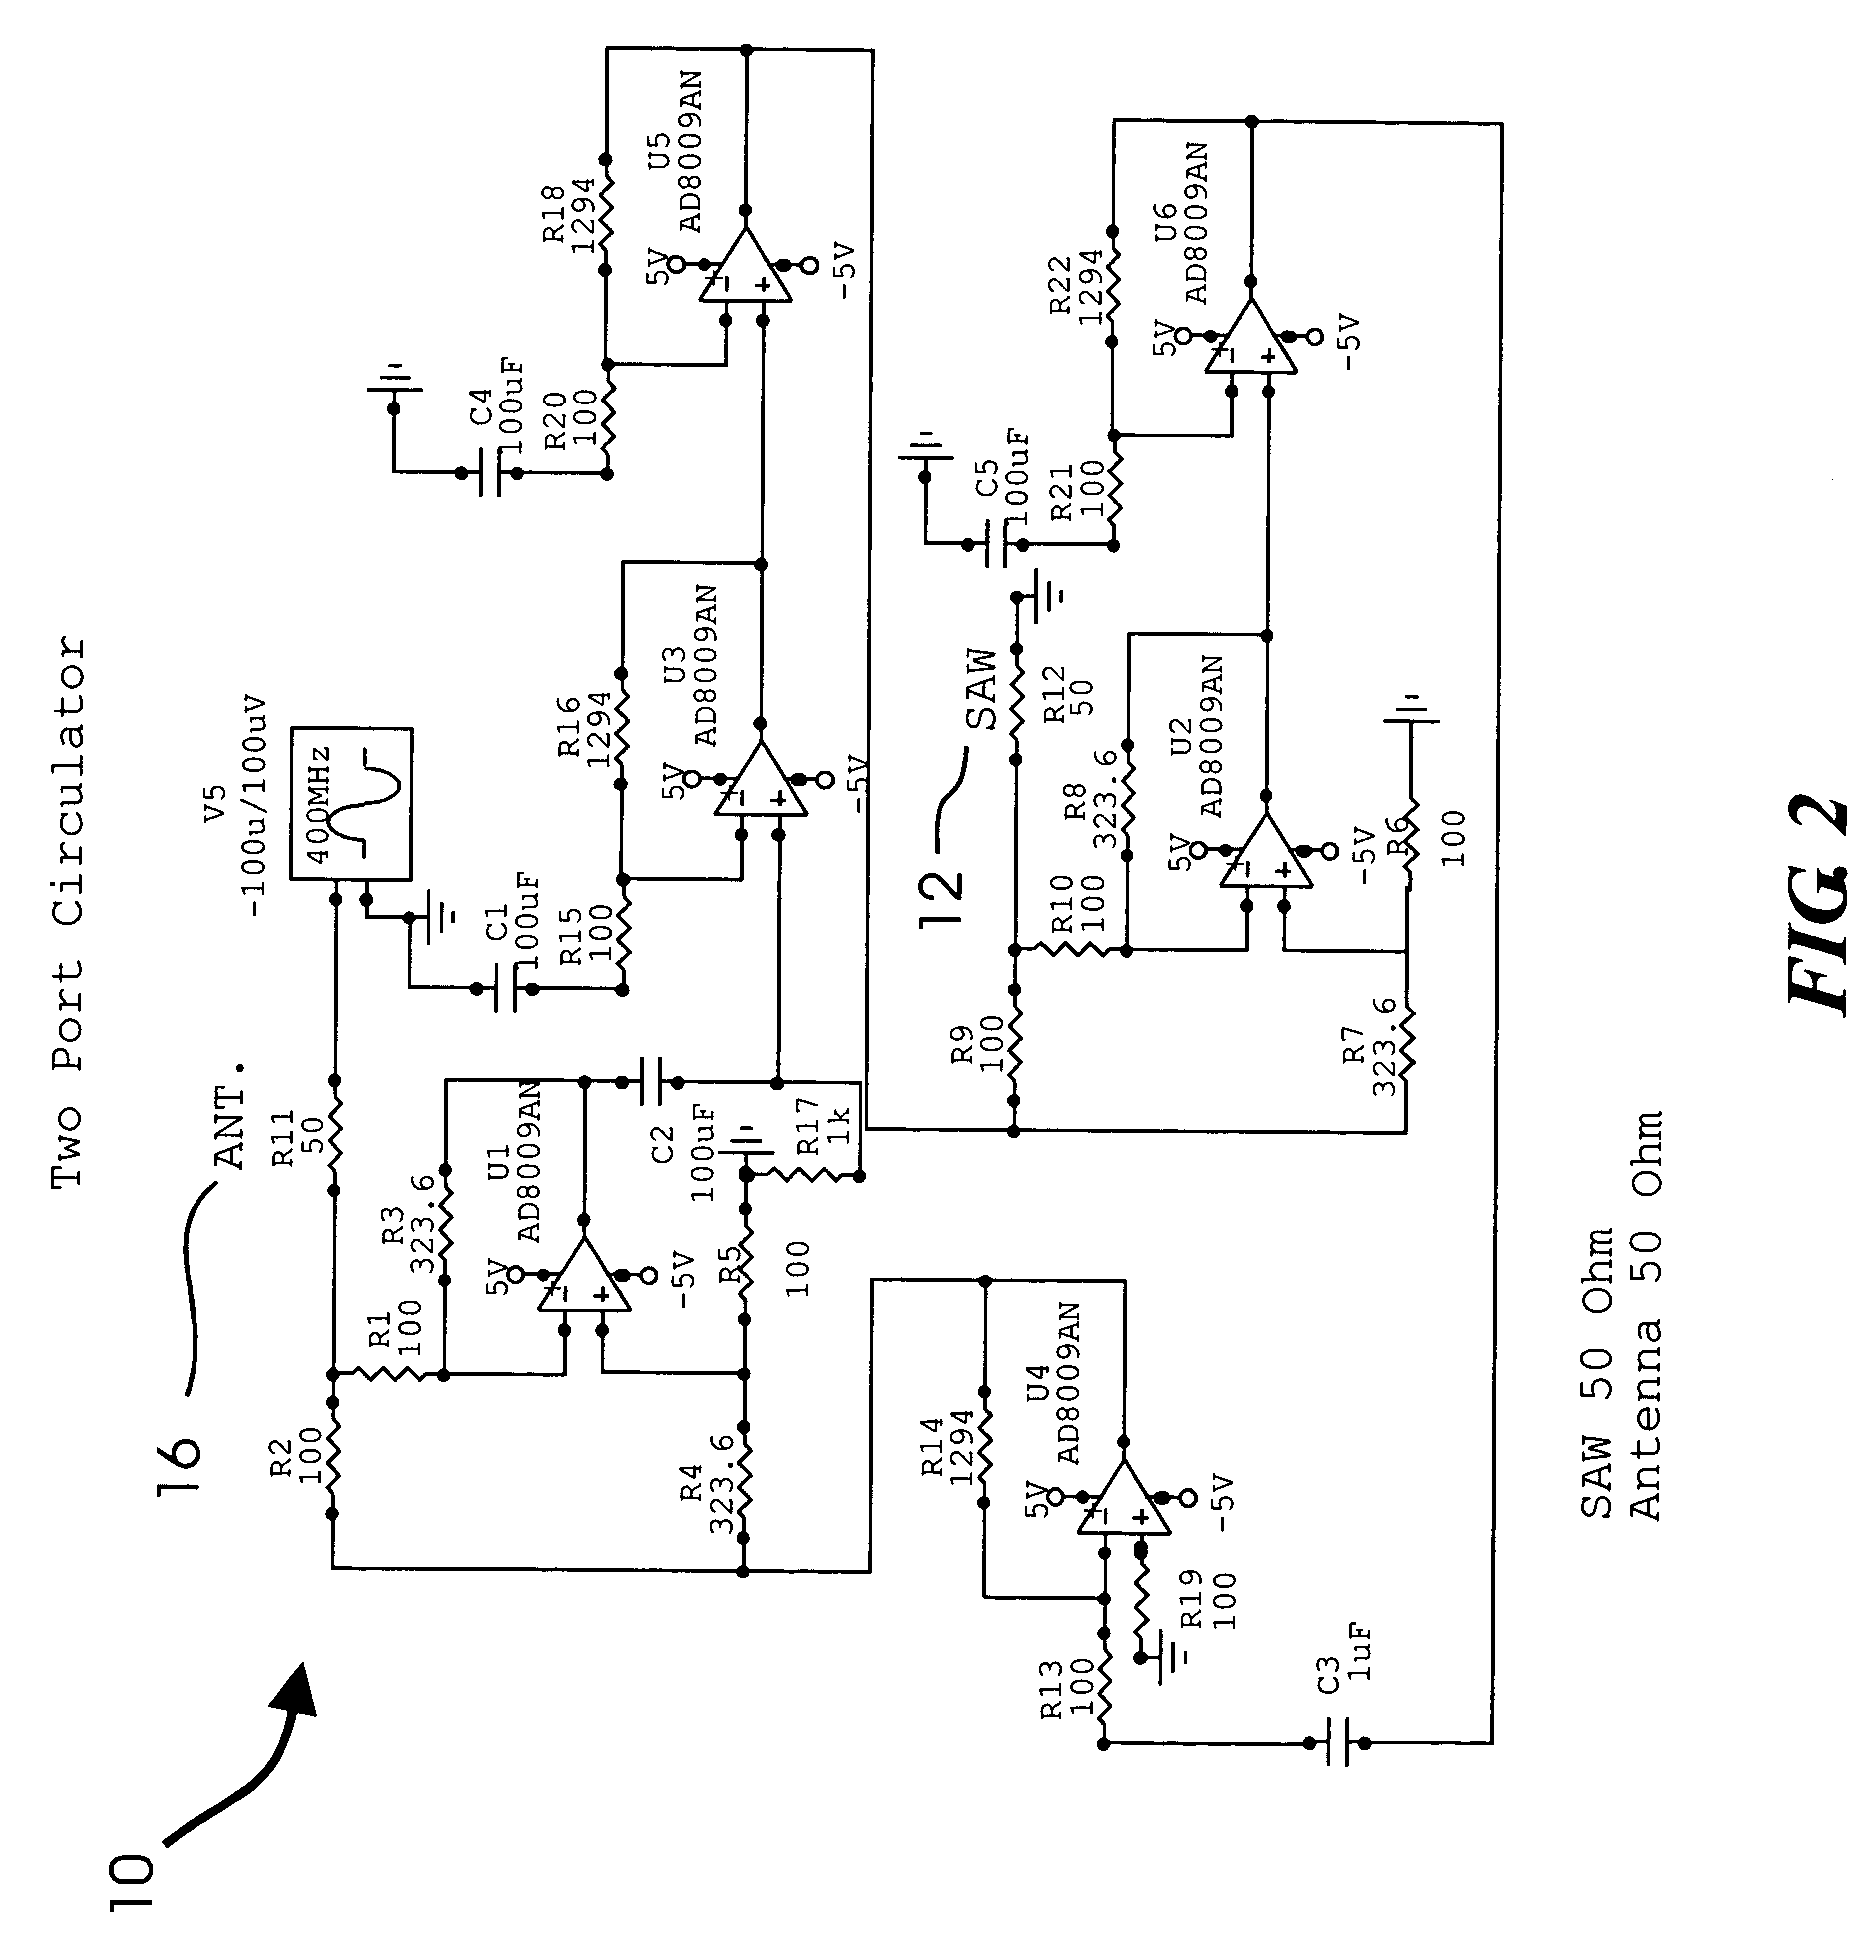 Apparatus and method for boosting signals from a signal-generating or modifying device